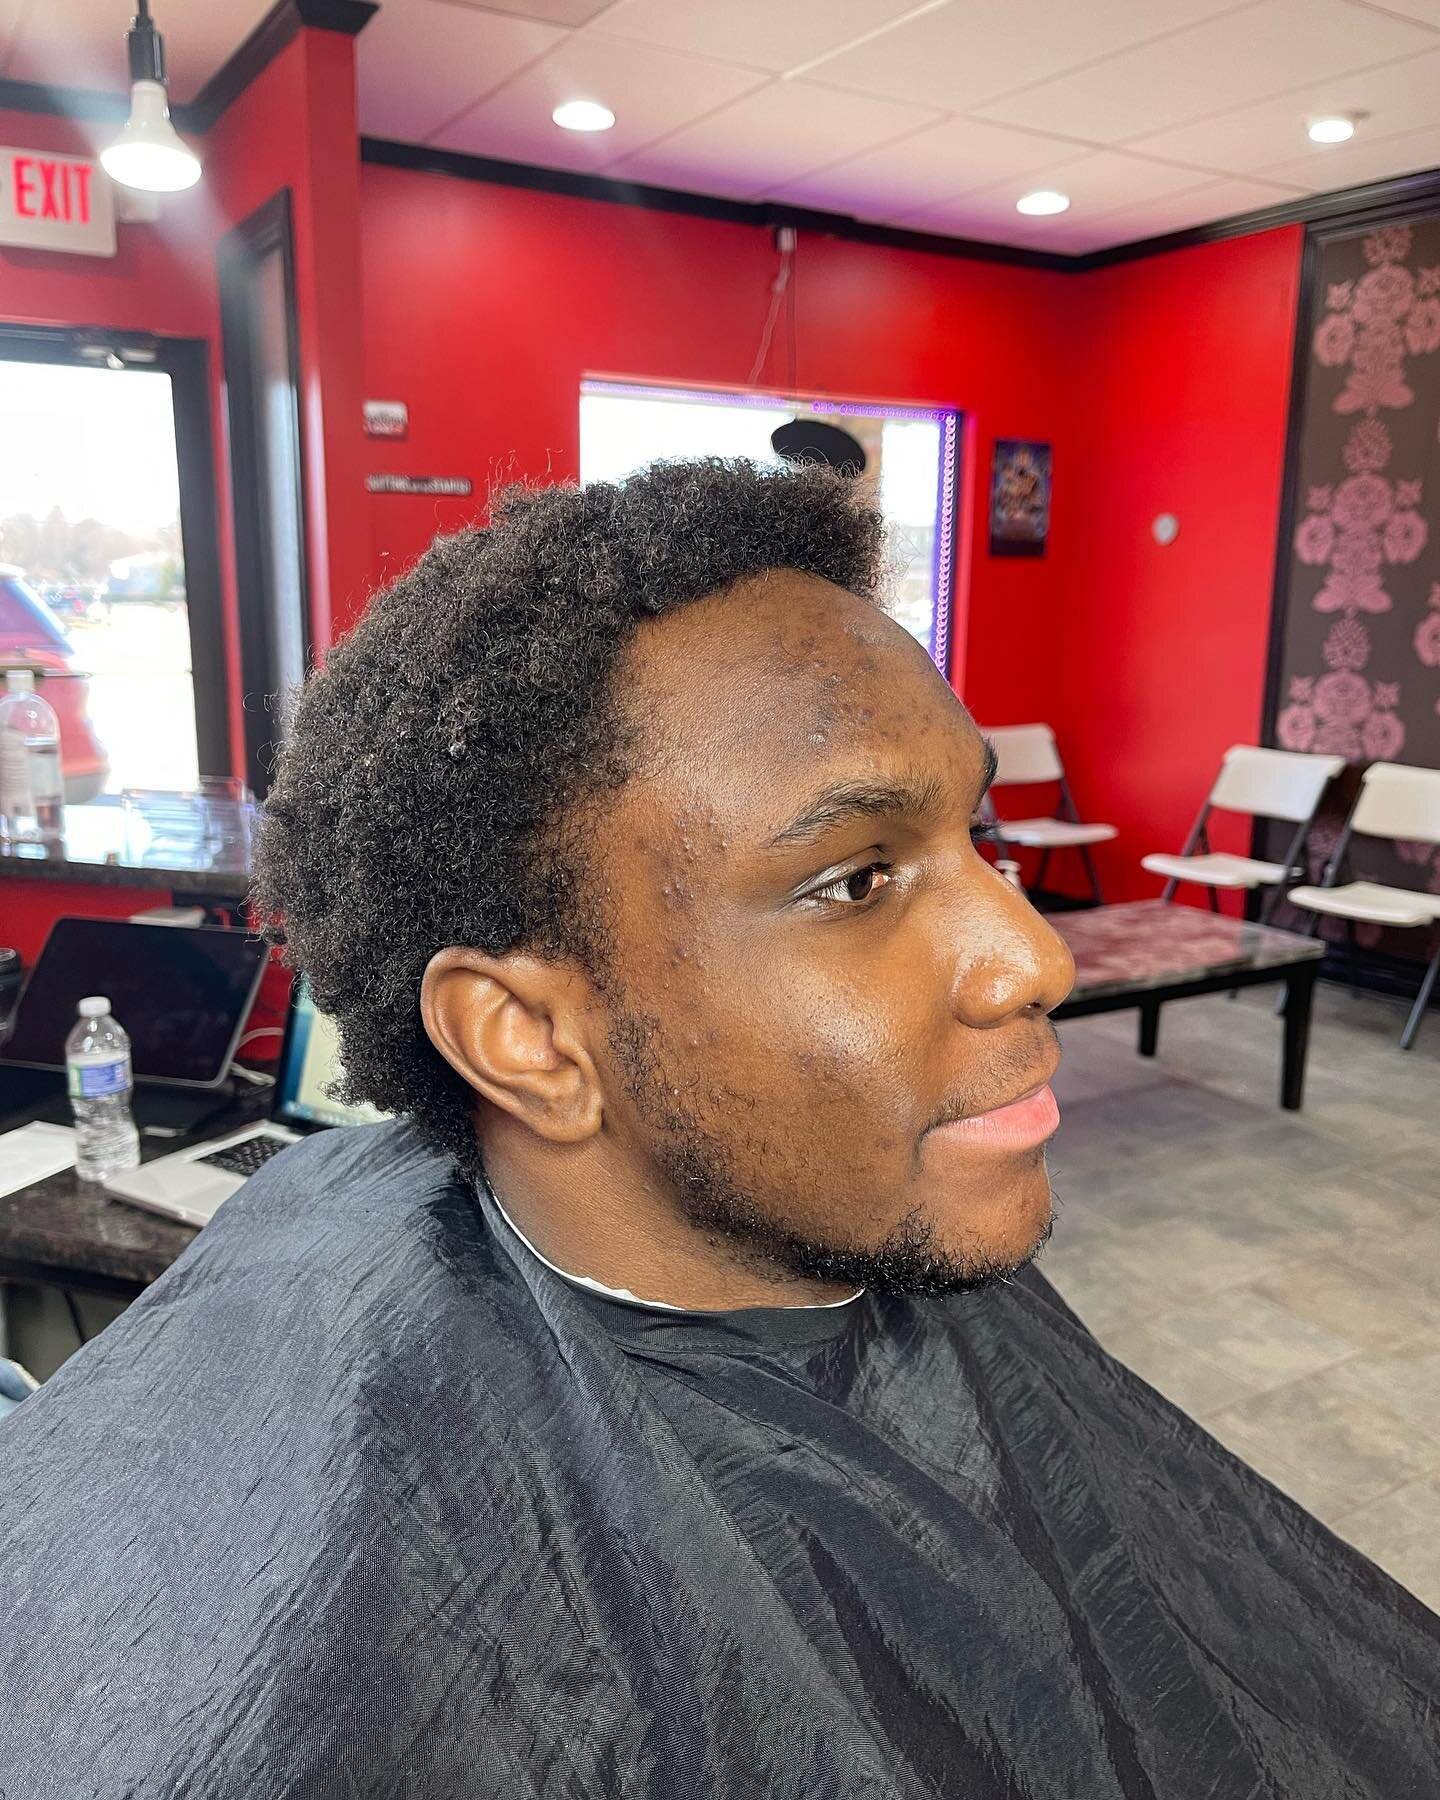 I usually don&rsquo;t do conservative haircuts but at the clients request I delivered #redemptionbarbershop #indianapolis #indianapolishairstylist #indianapolisbarber #indianapolisbarbershop #greenwoodindiana #greenwoodbarbershop